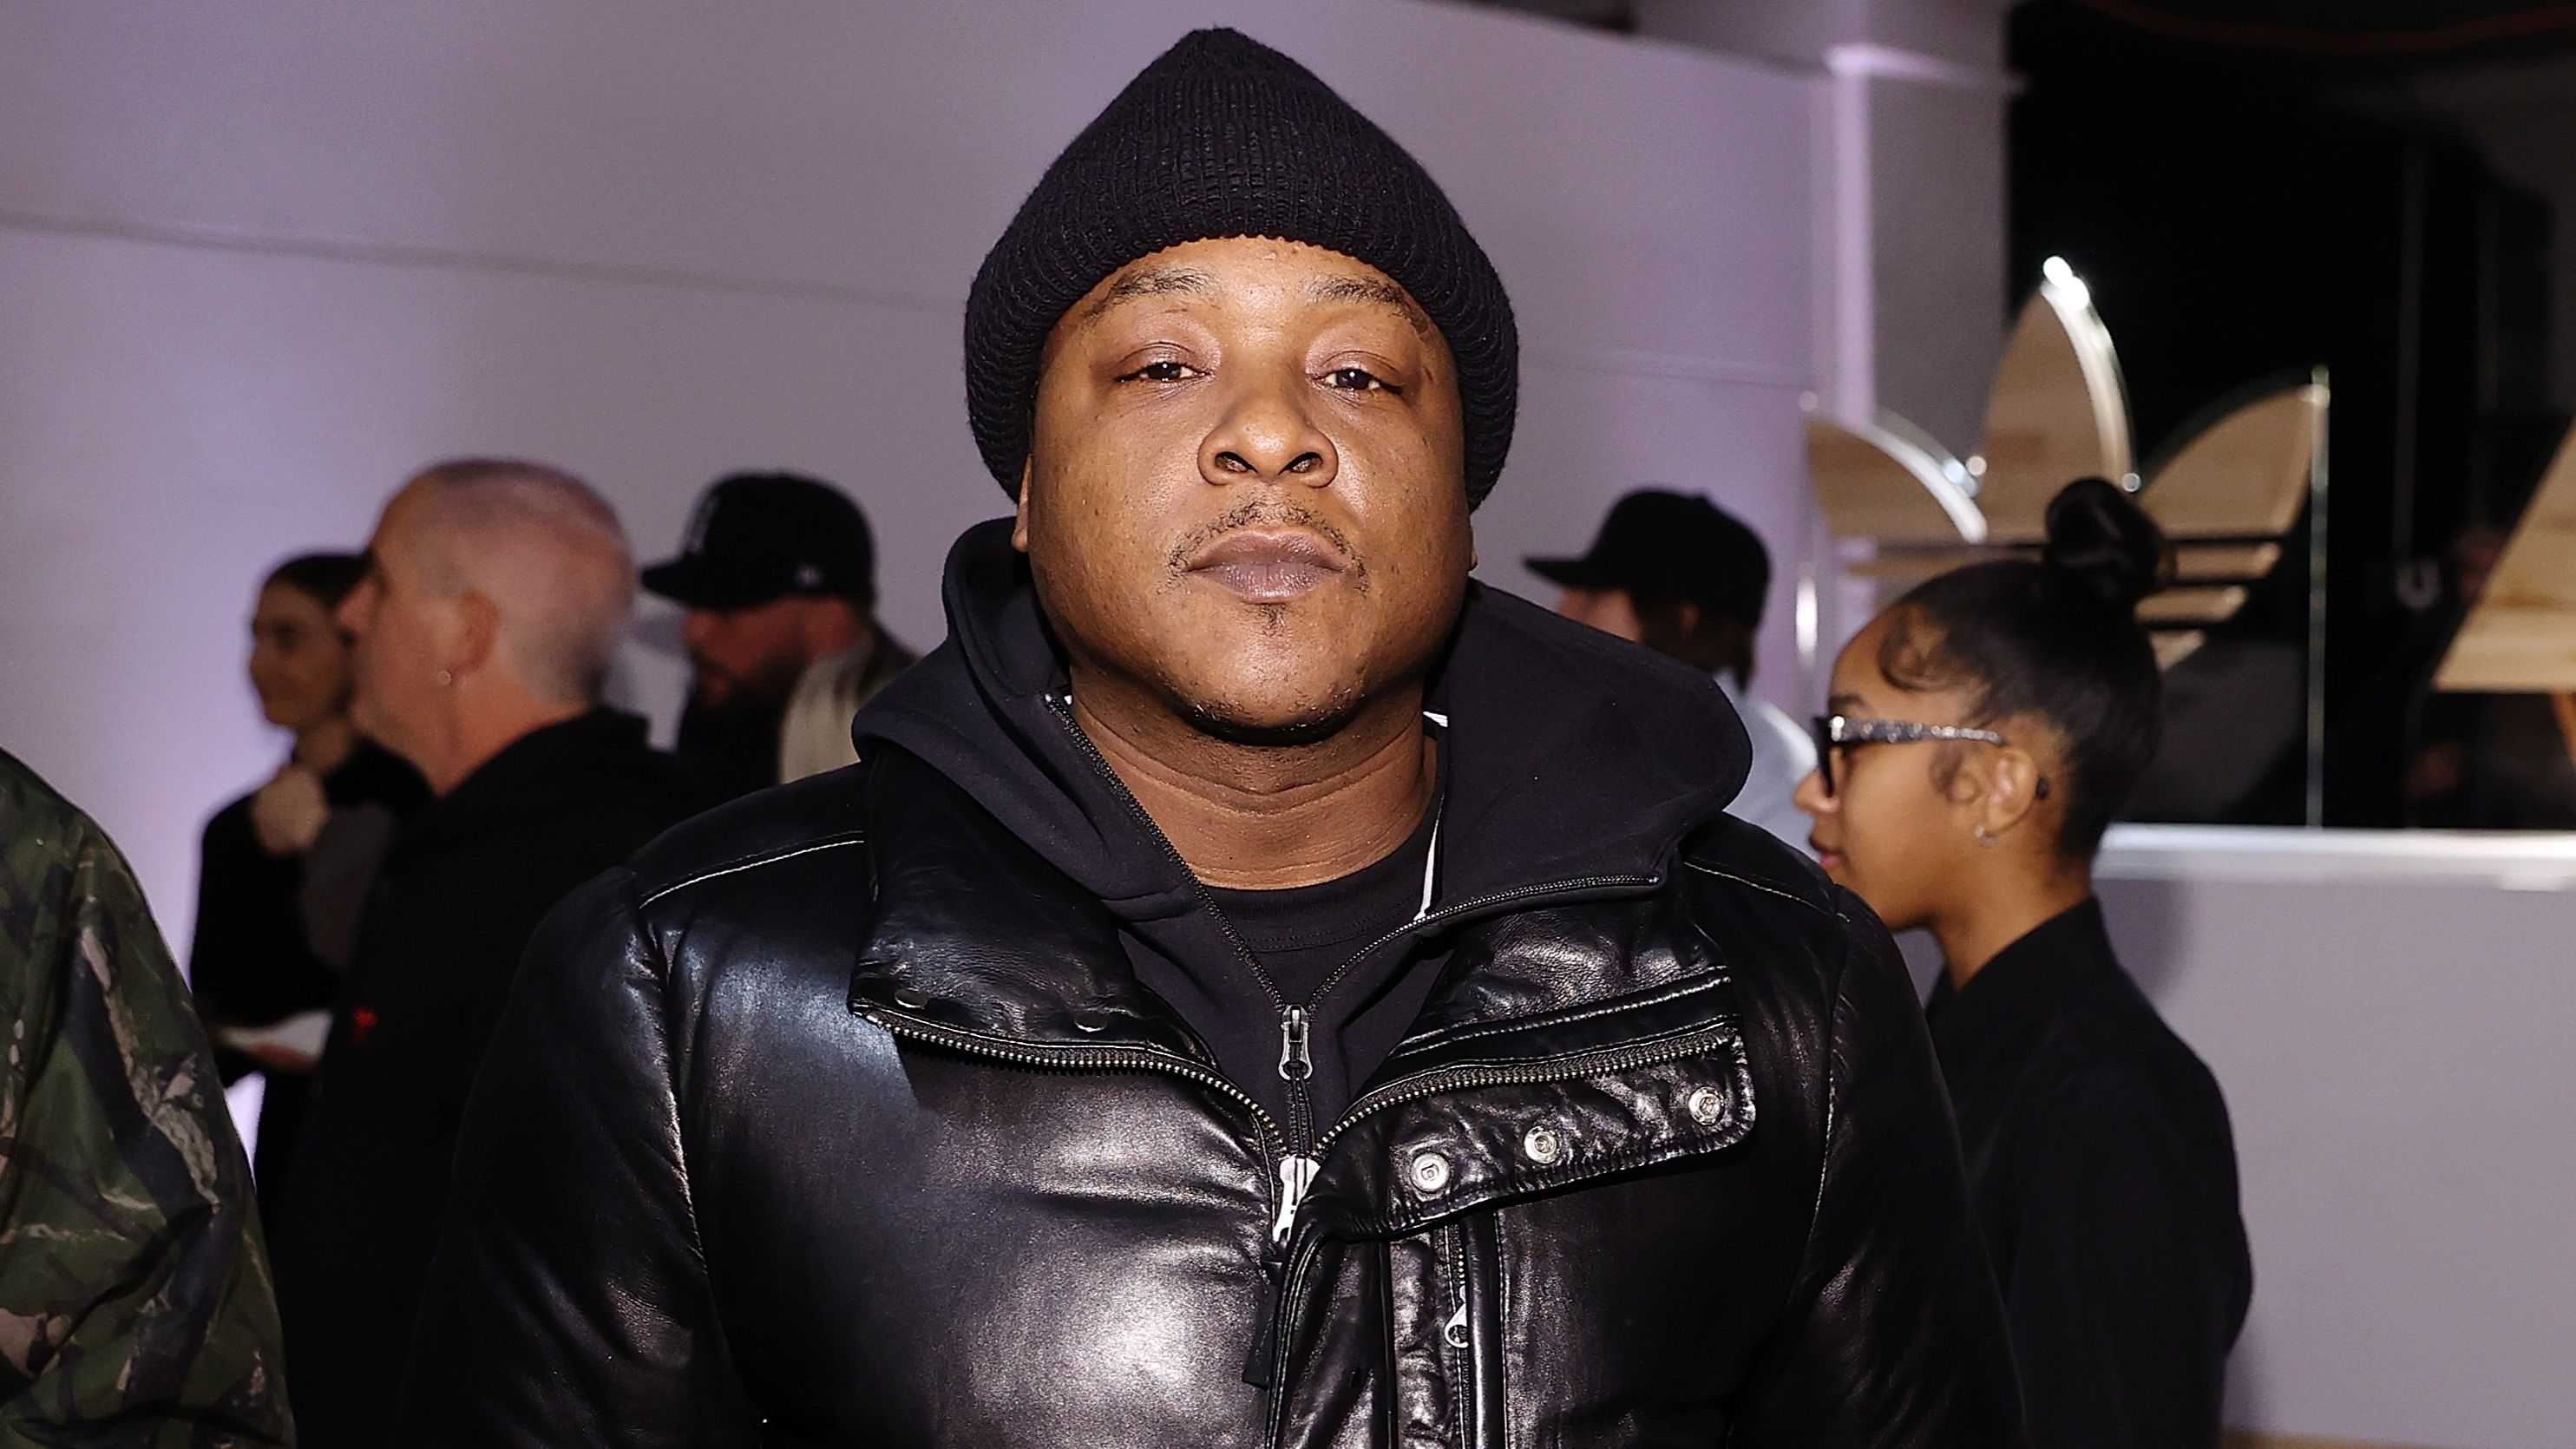 Jadakiss Wants The NBA To Stop Snubbing Him For Celebrity All-Star Game